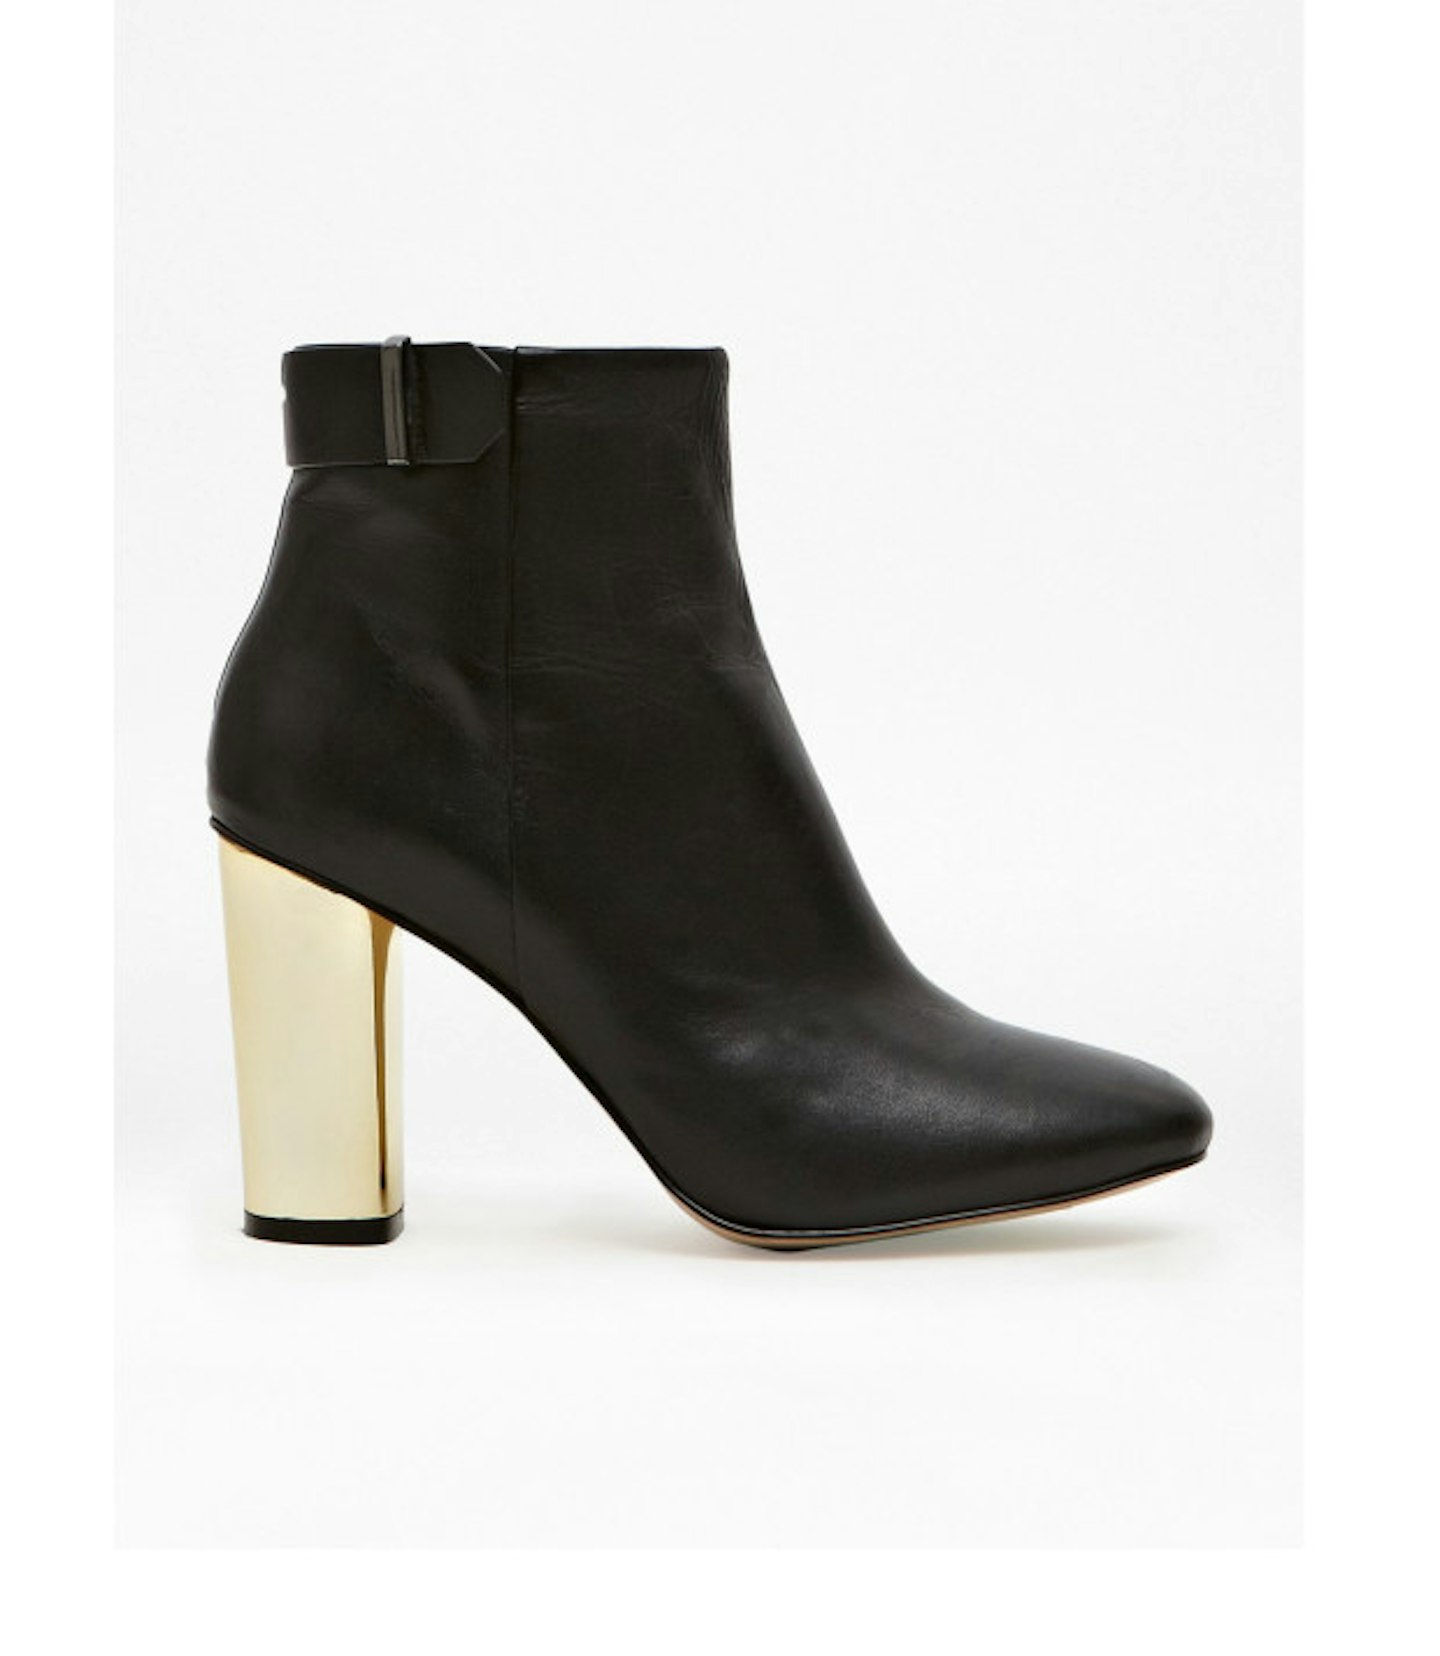 Gold-heeled ankle boots